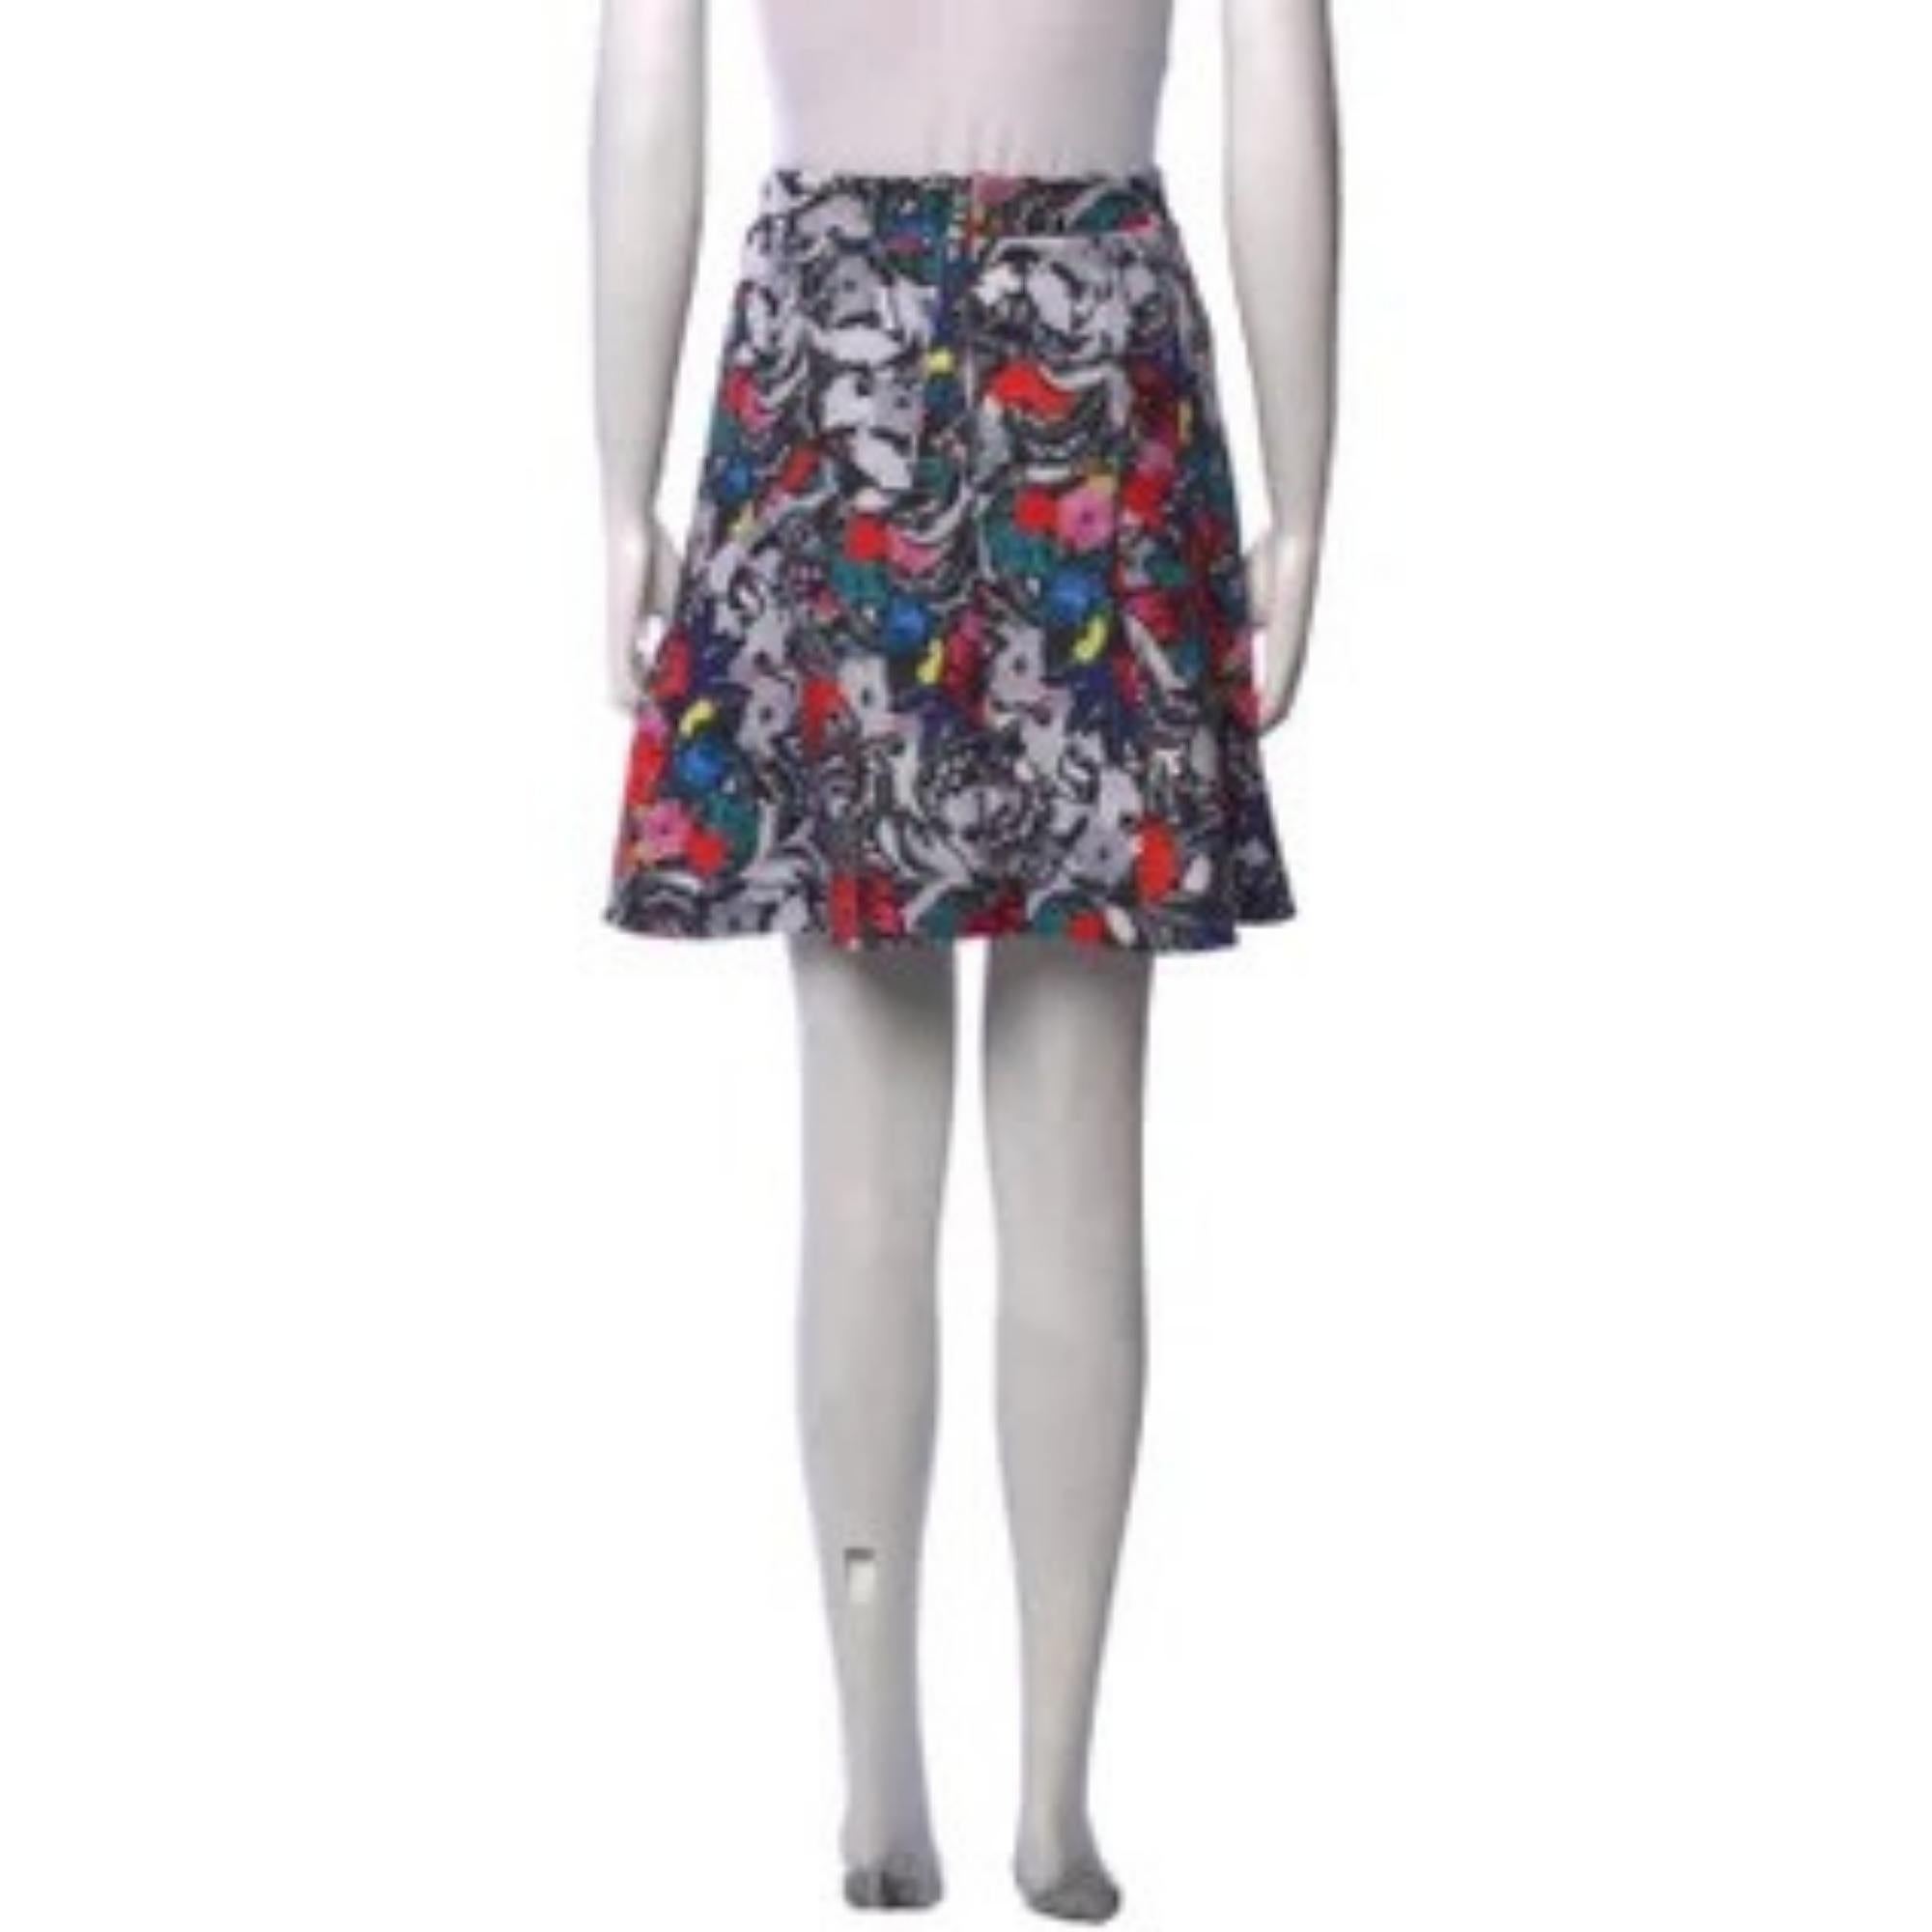 Sonia by Sonia Rykiel Floral Print Mini Skirt (Small) In Good Condition For Sale In Montreal, Quebec